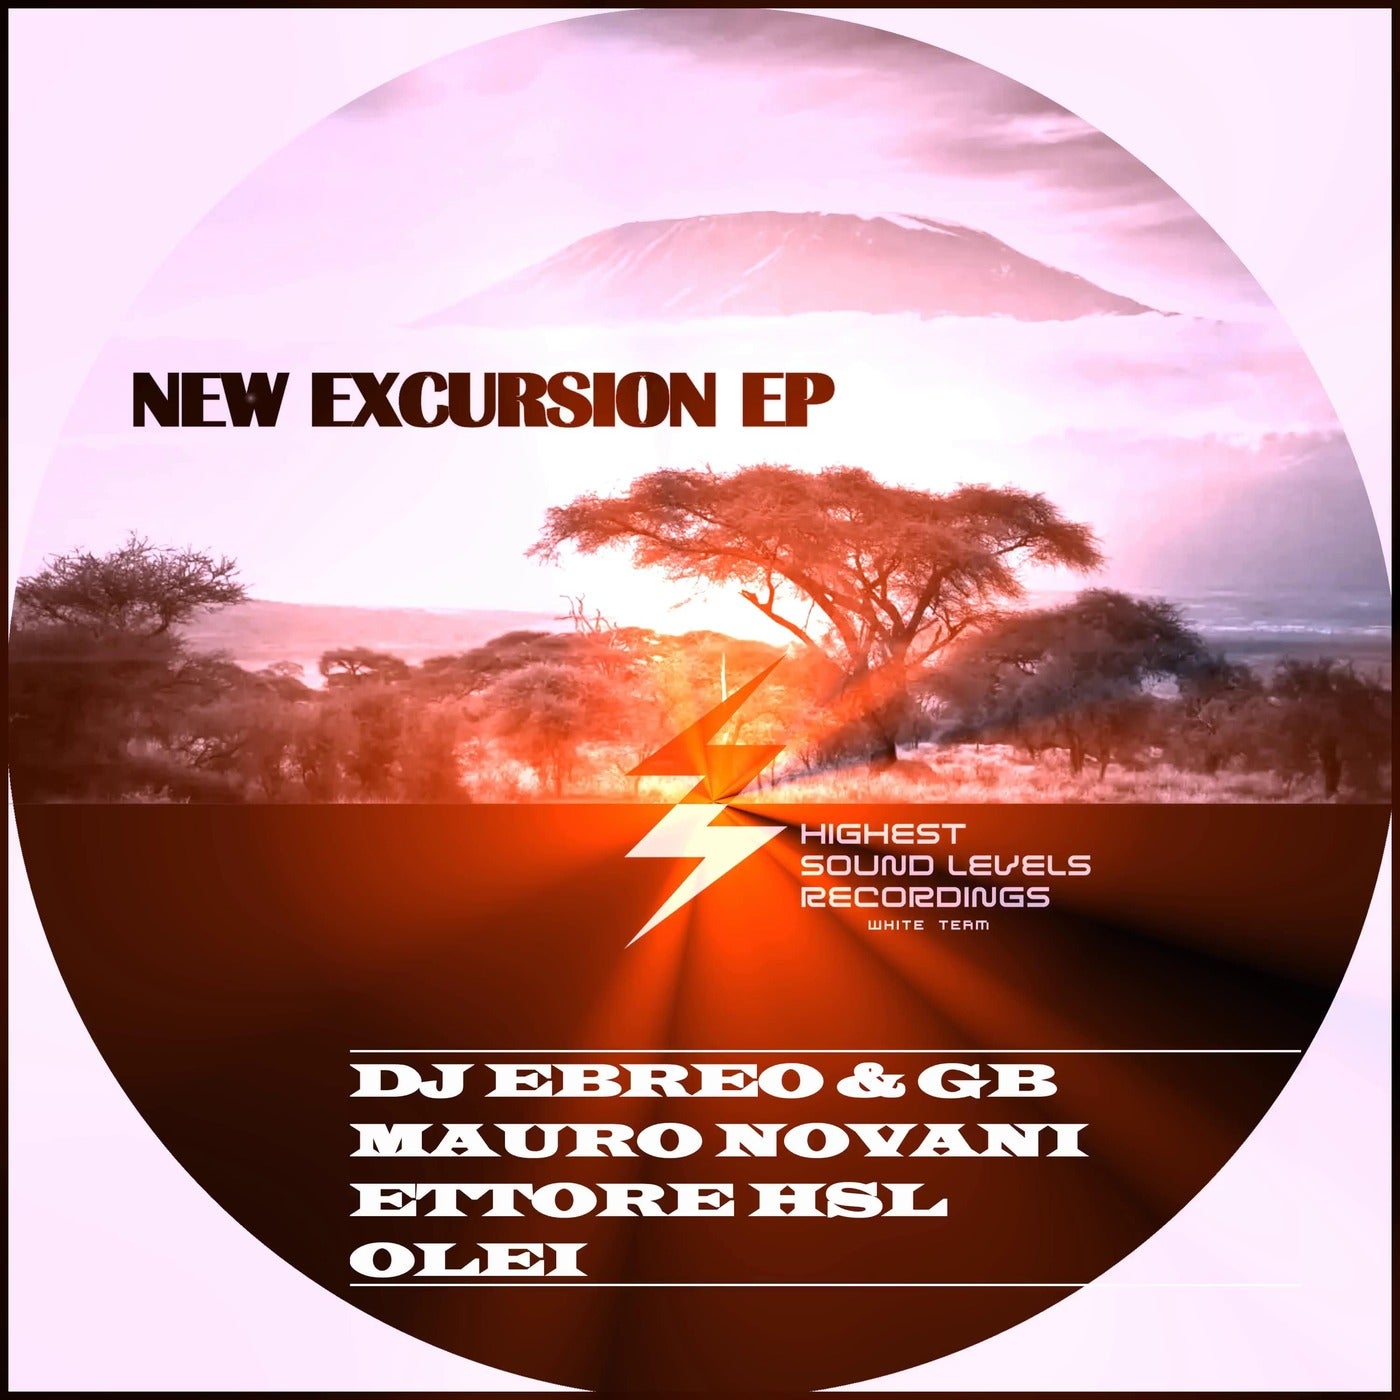 New Excursion Ep